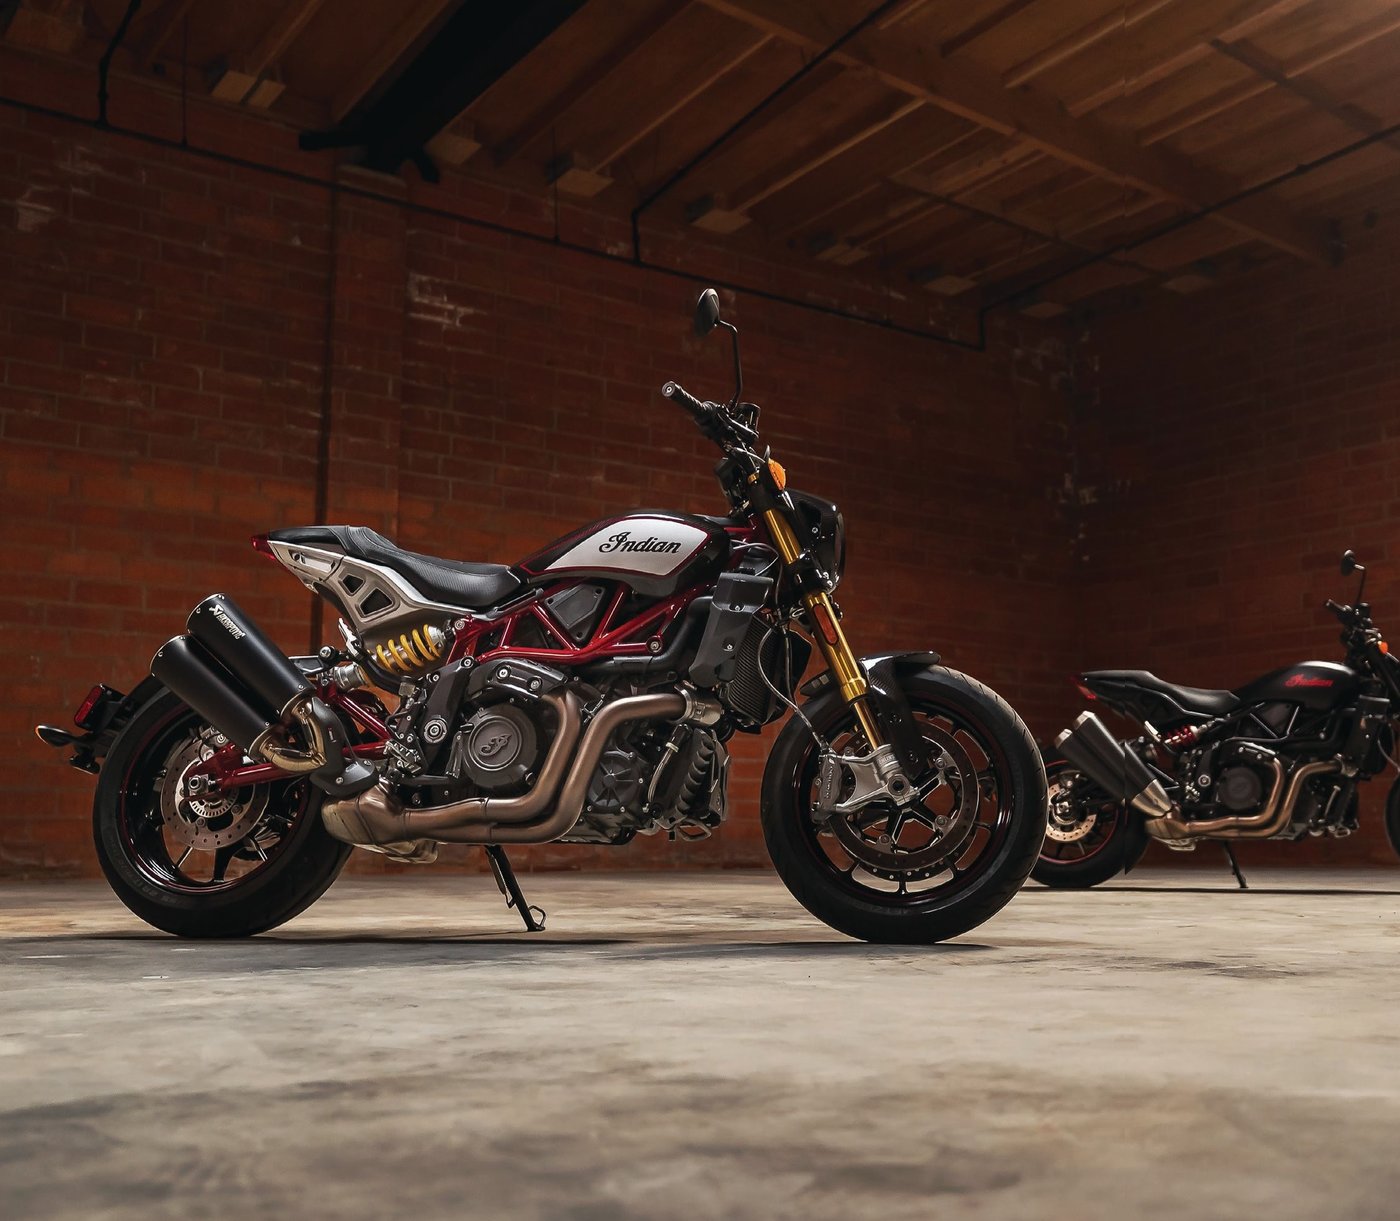 The new FTR R Carbon motorcycle and first-ever kids minibike make quite a pair. PHOTO COURTESY OF BRAND